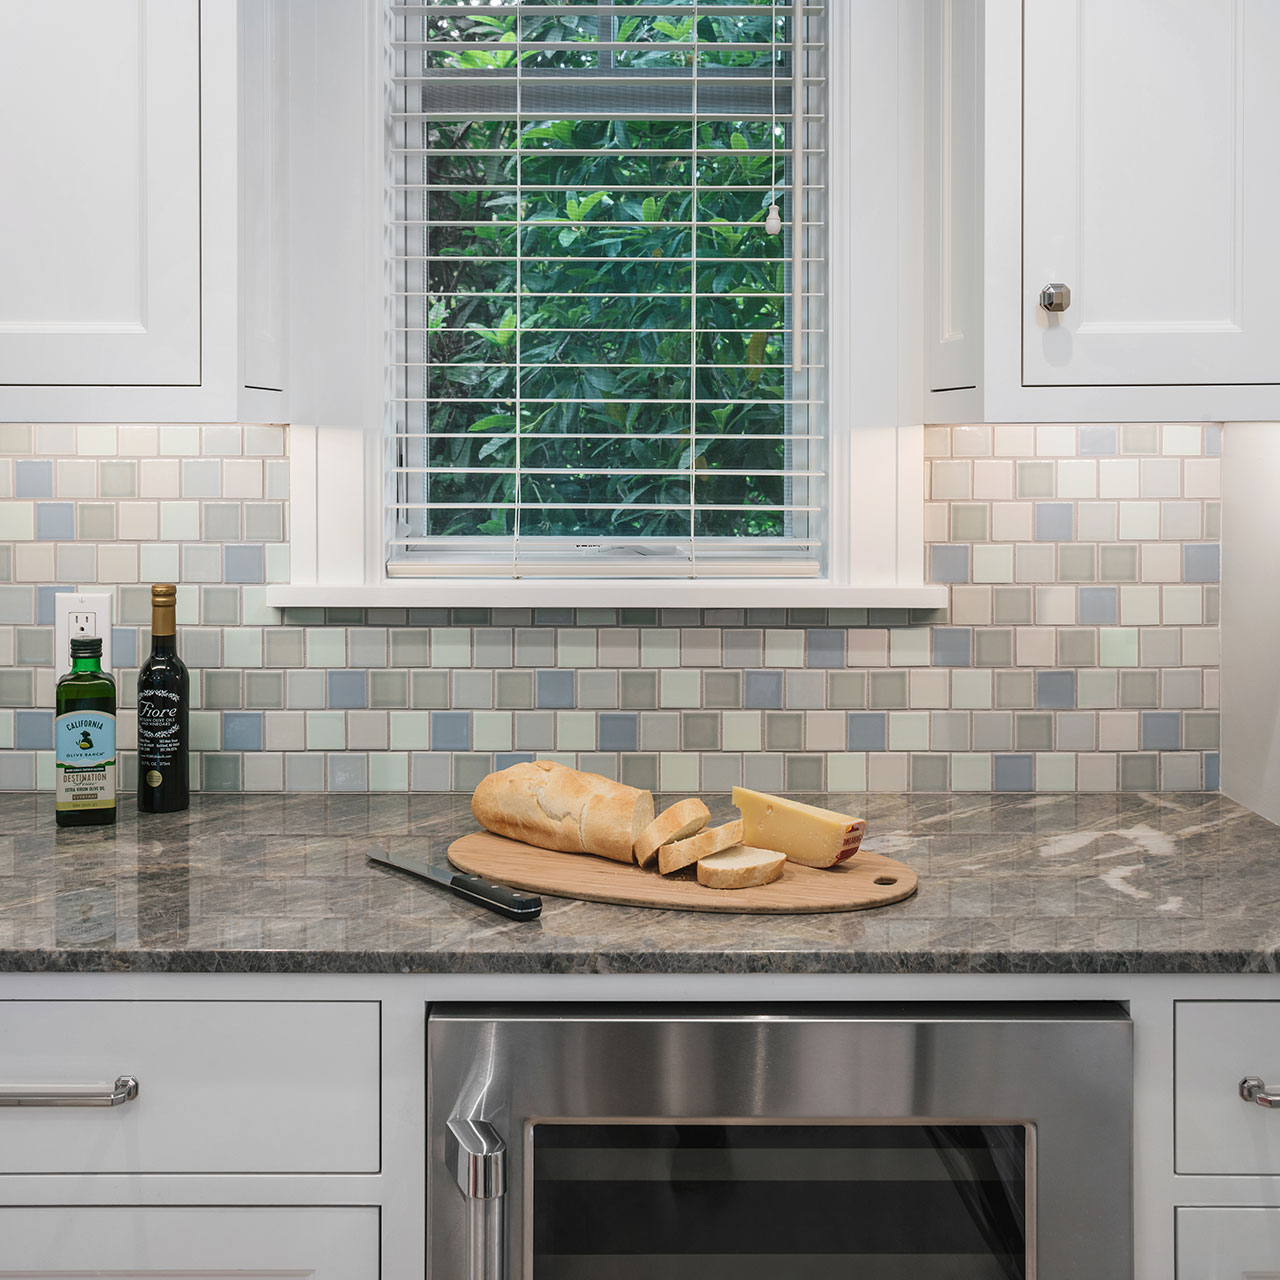 Granite countertops with a custom tile backsplash create an inviting space to prepare meals in the Hillside House kitchen.